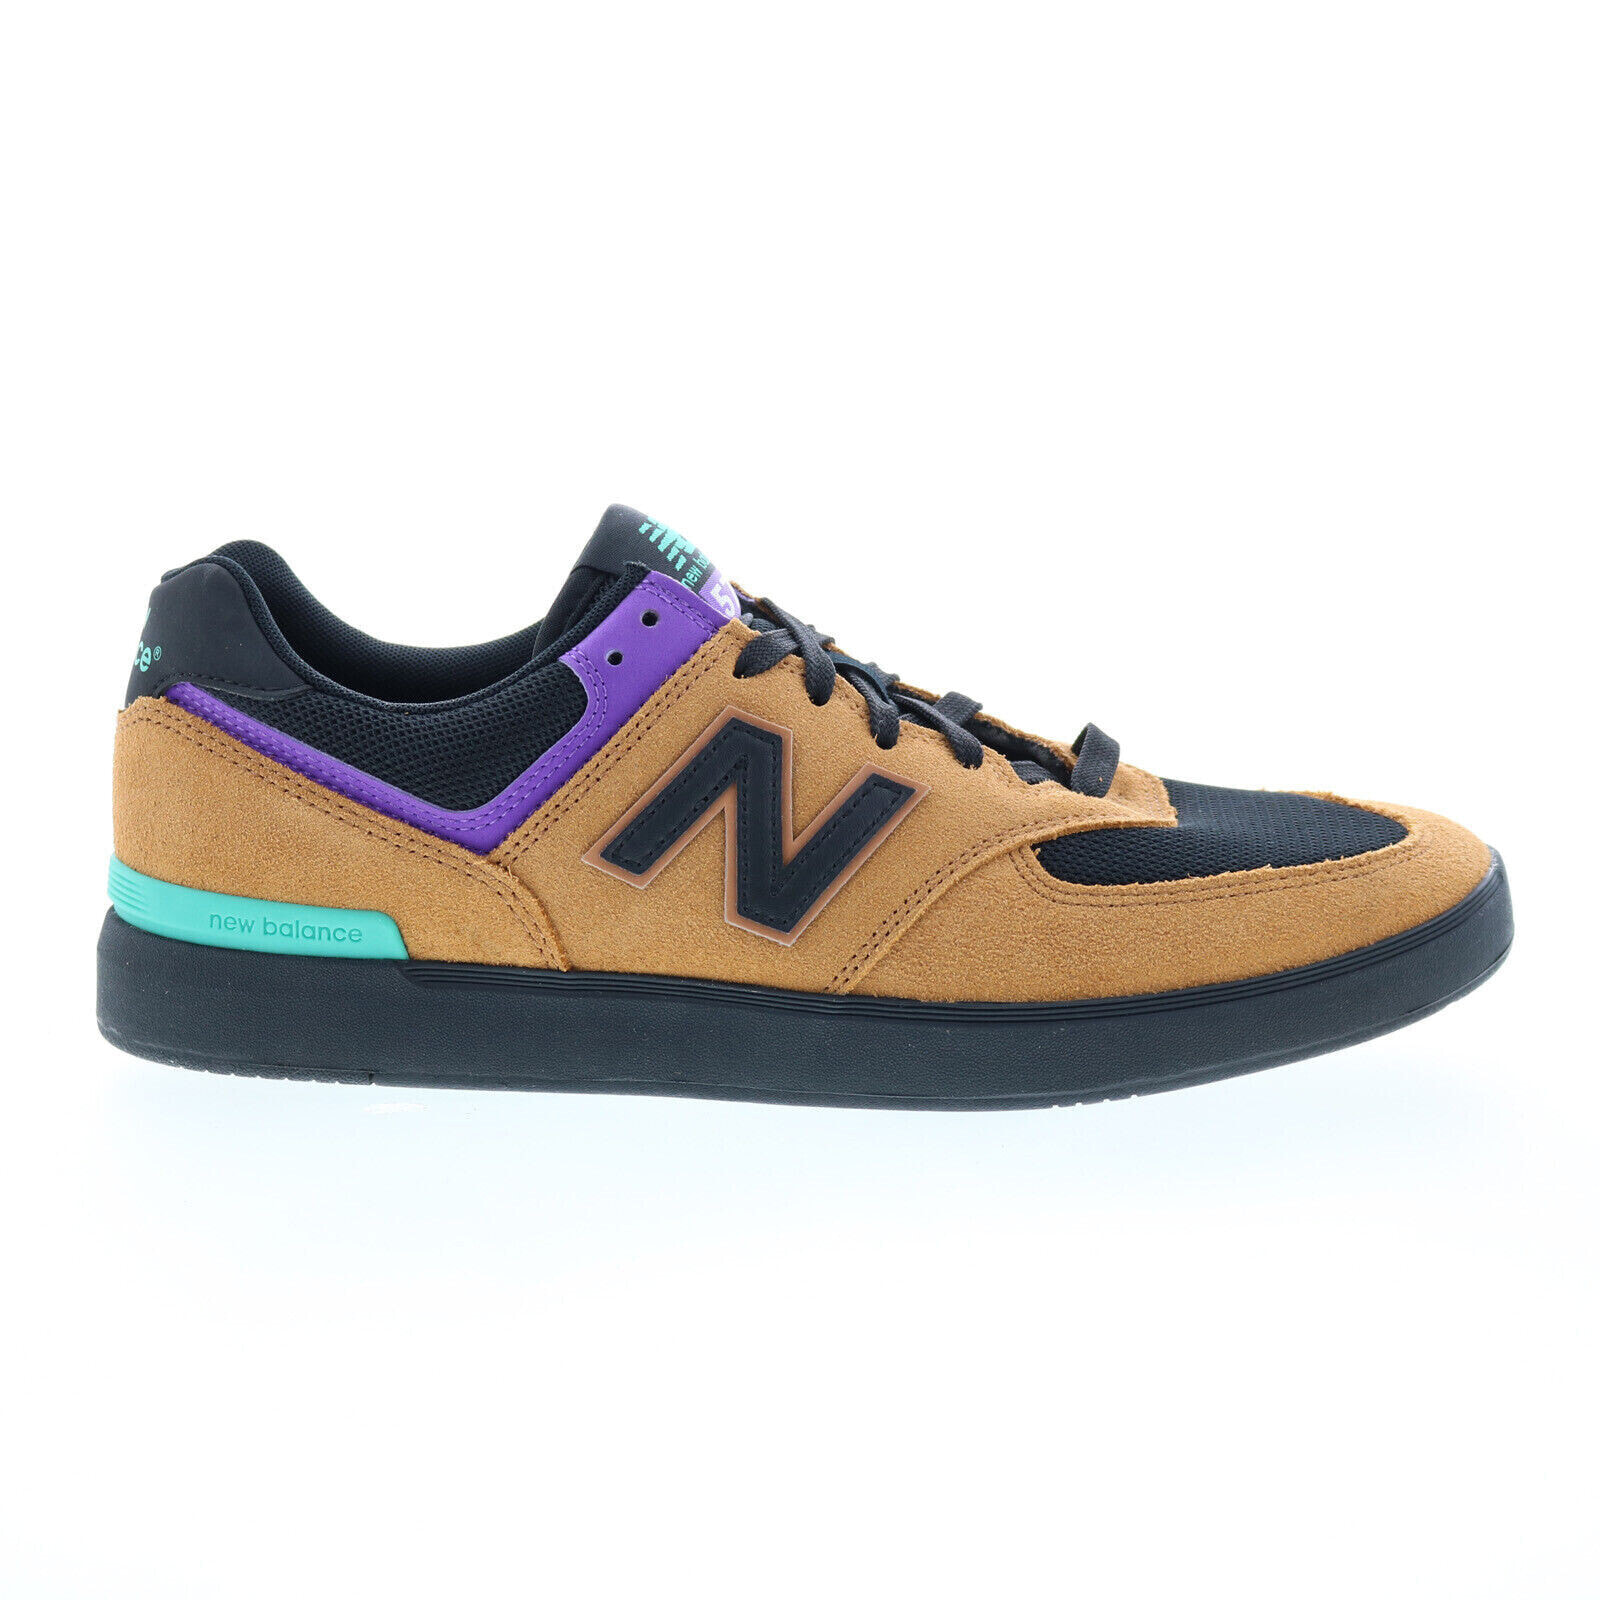 New Balance 997H CW997HWM Womens Brown Suede Lifestyle Sneakers Shoes